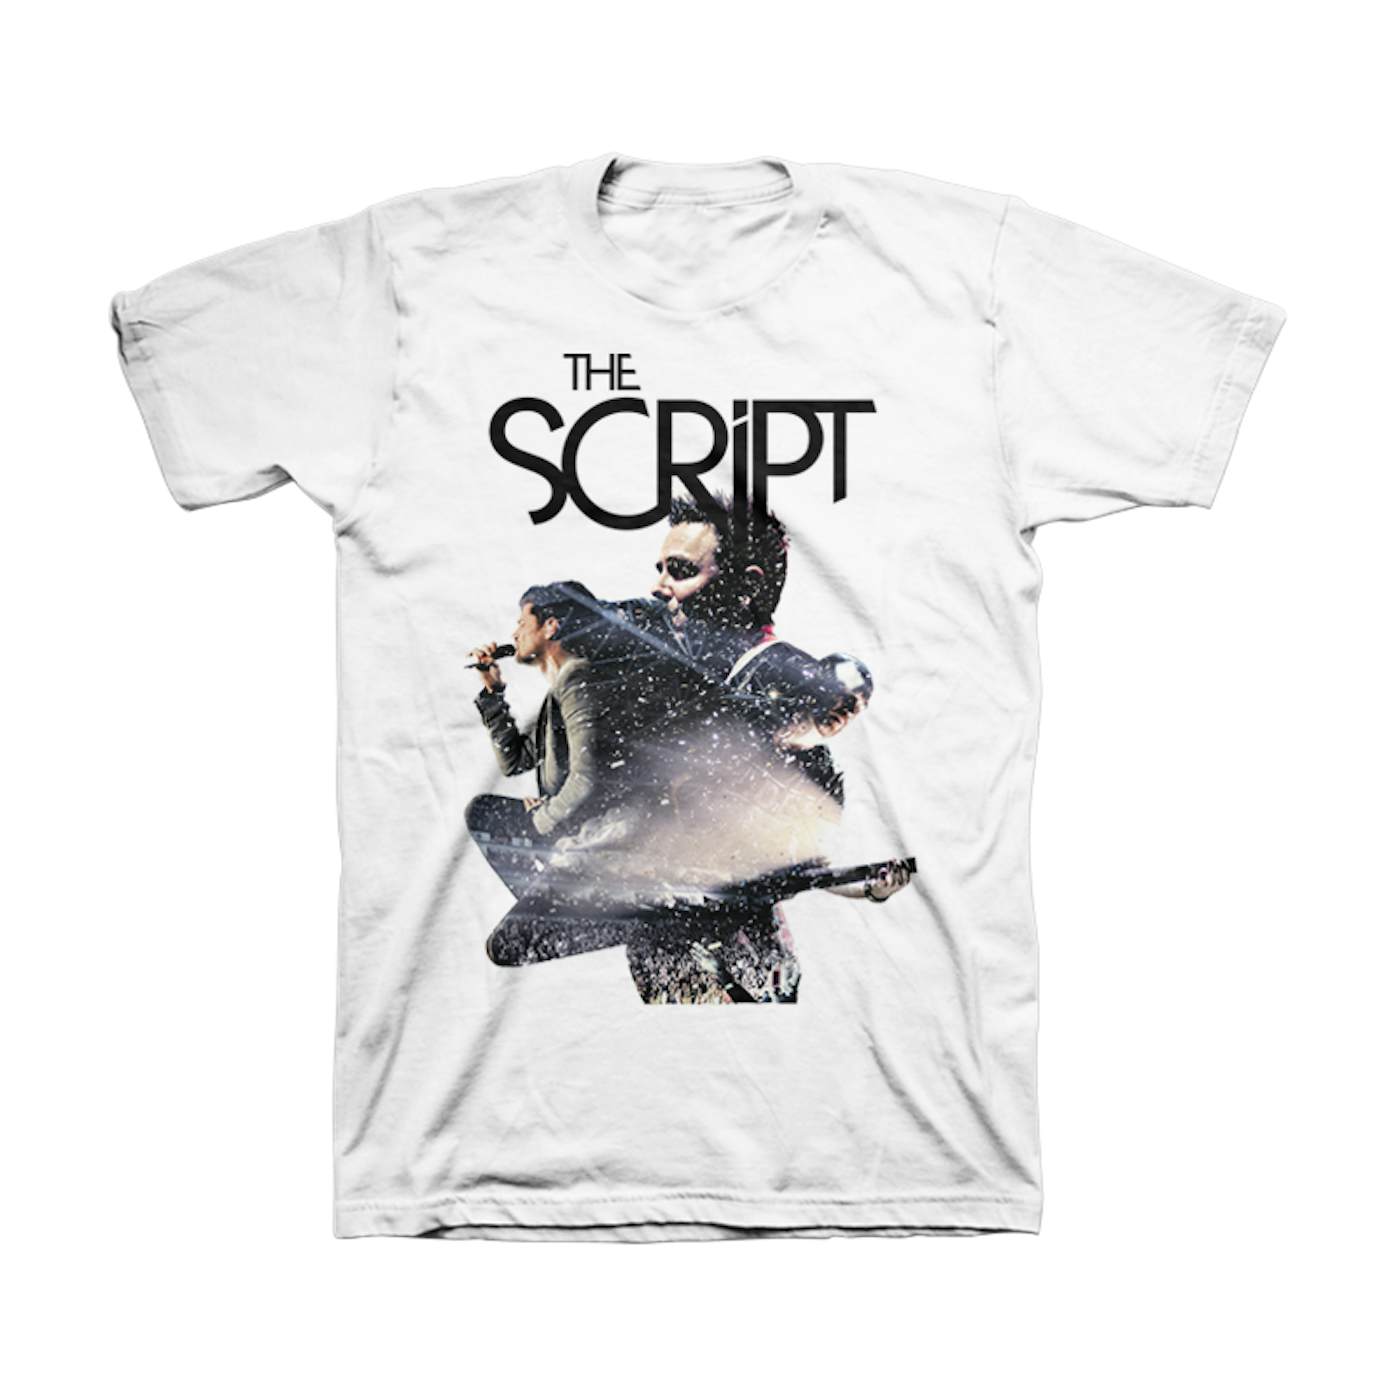 The Script Event Collage Tee